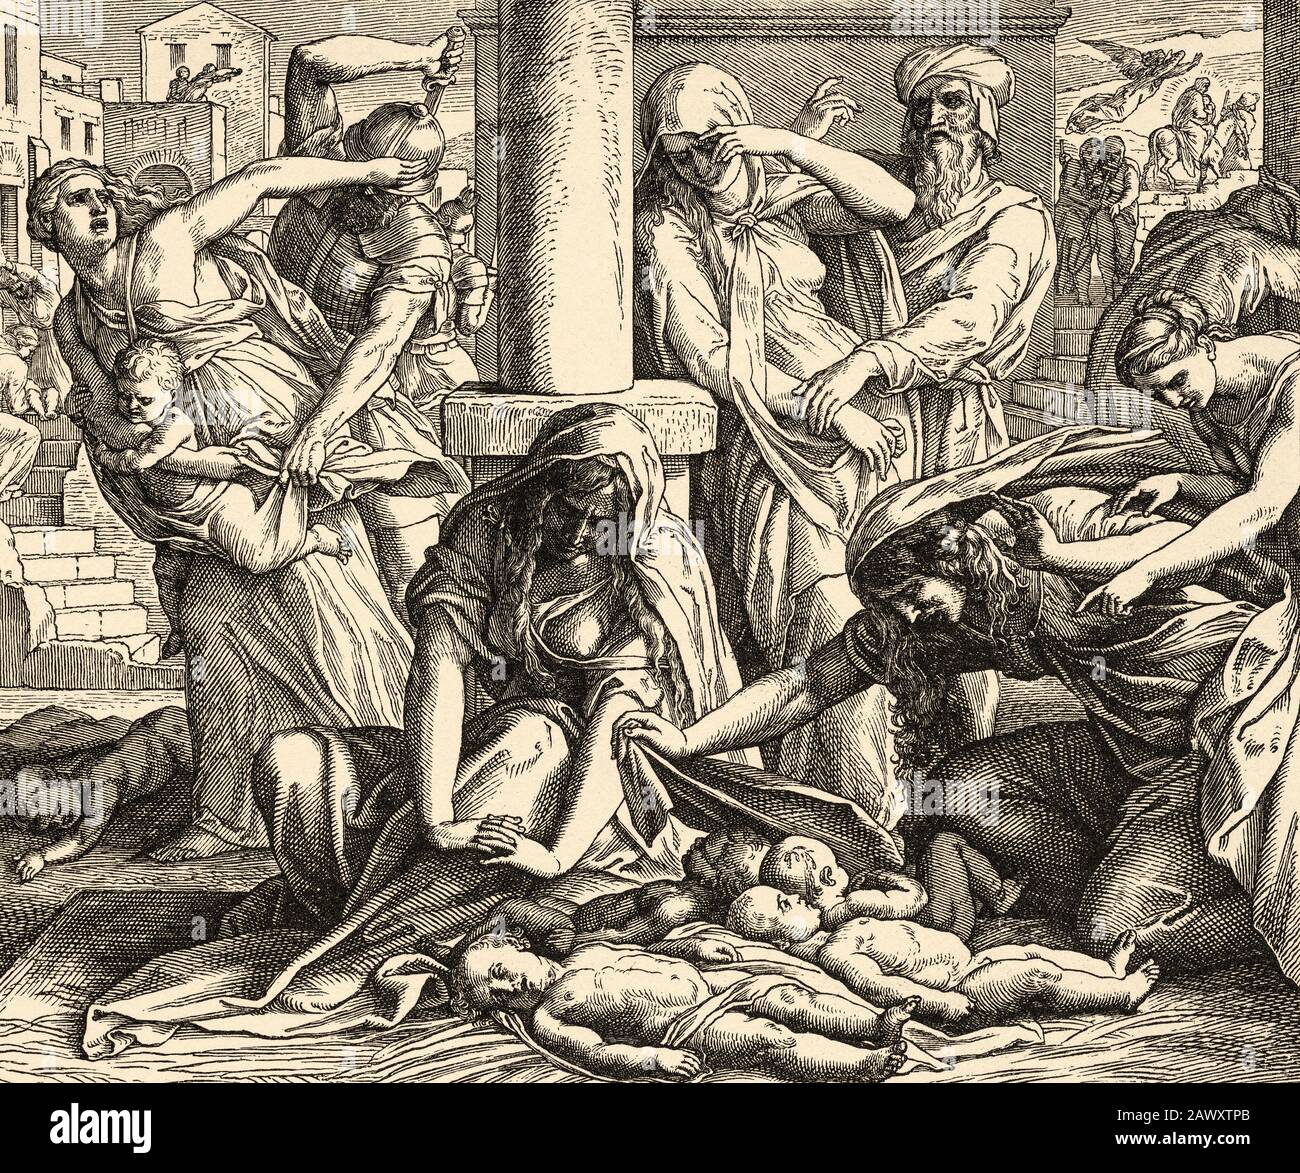 The child murder at Bethlehem. King Herod did kill all the children two years below. Matthew book, New Testament Sacred biblical history. Old engravin Stock Photo